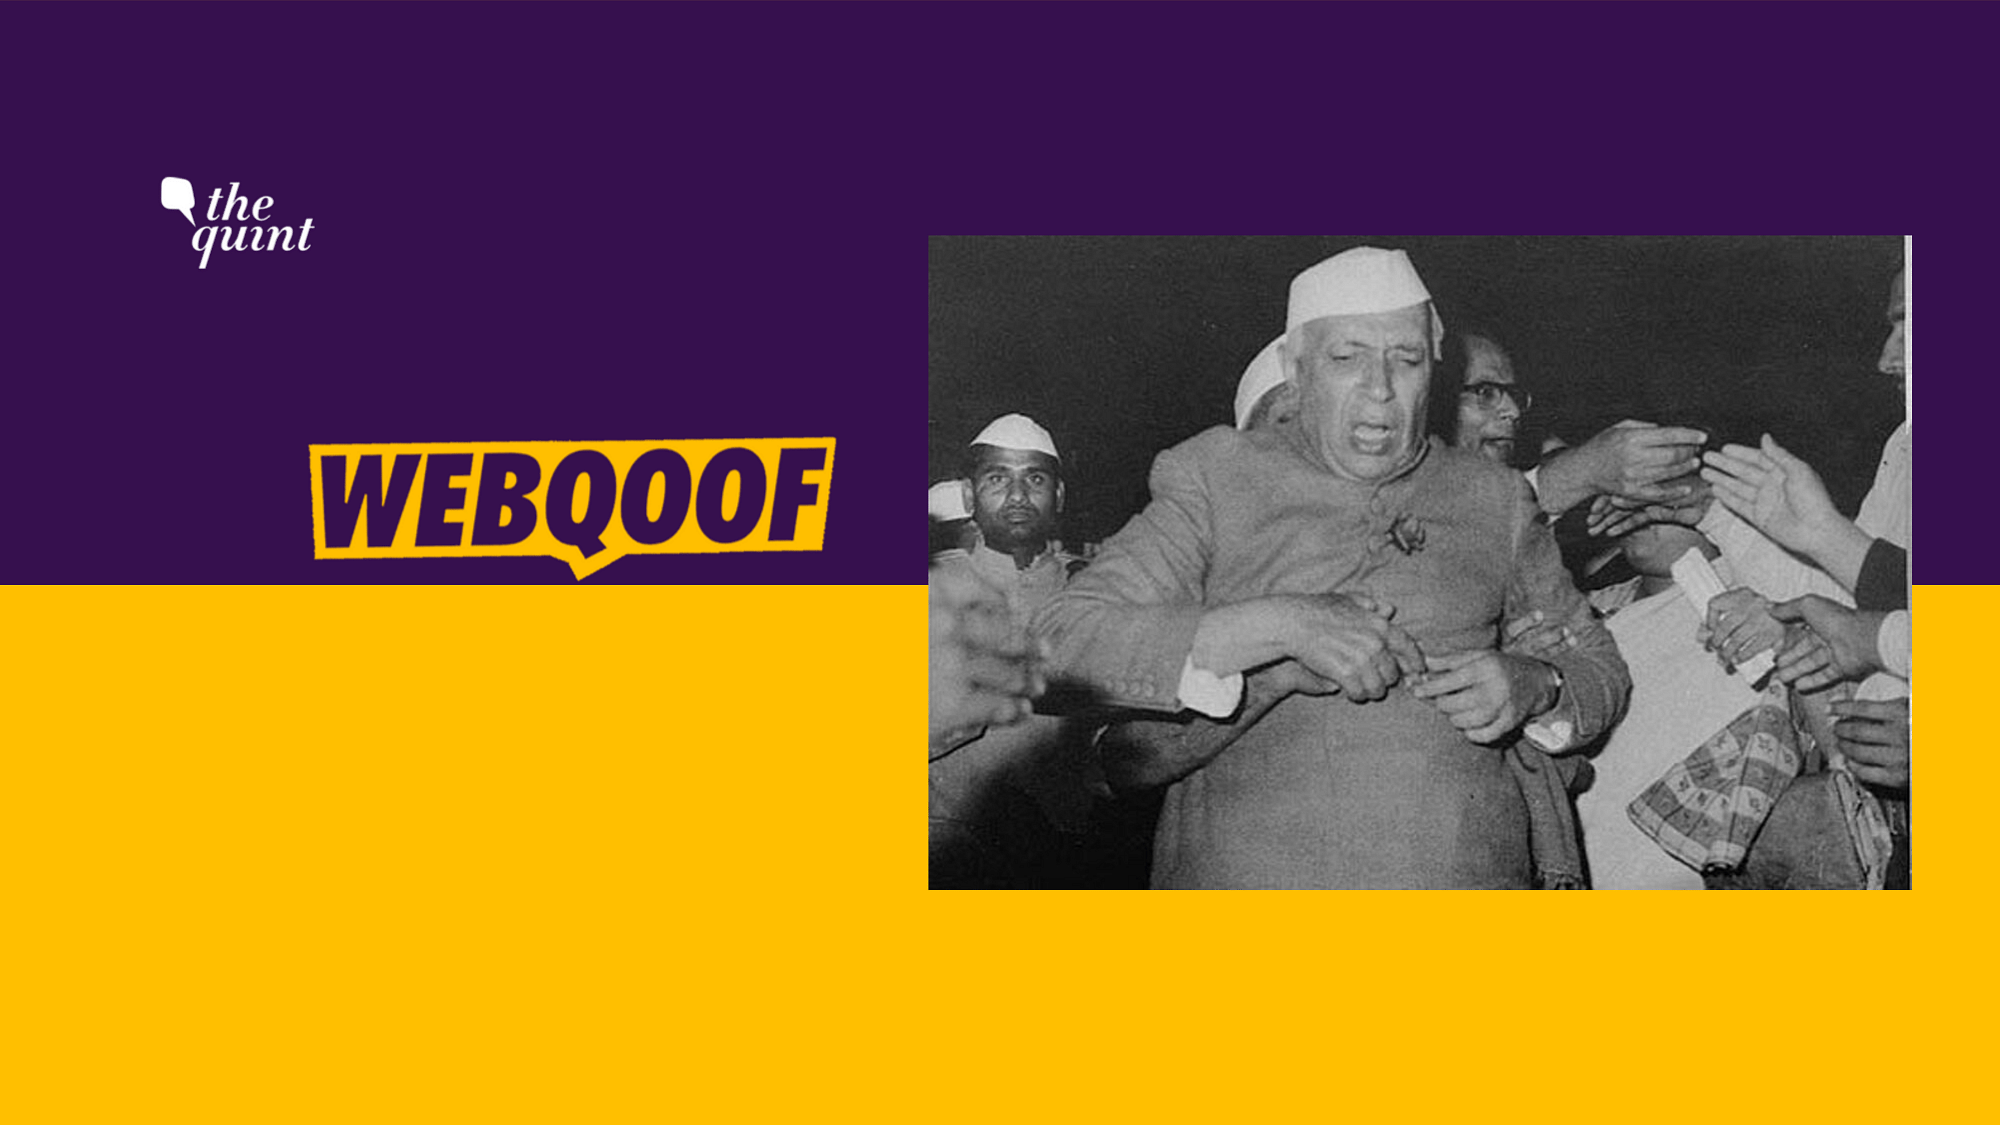 A photo of Jawaharlal Nehru is being shared with the claim that it shows him being held back when he wanted to retaliate after being slapped.